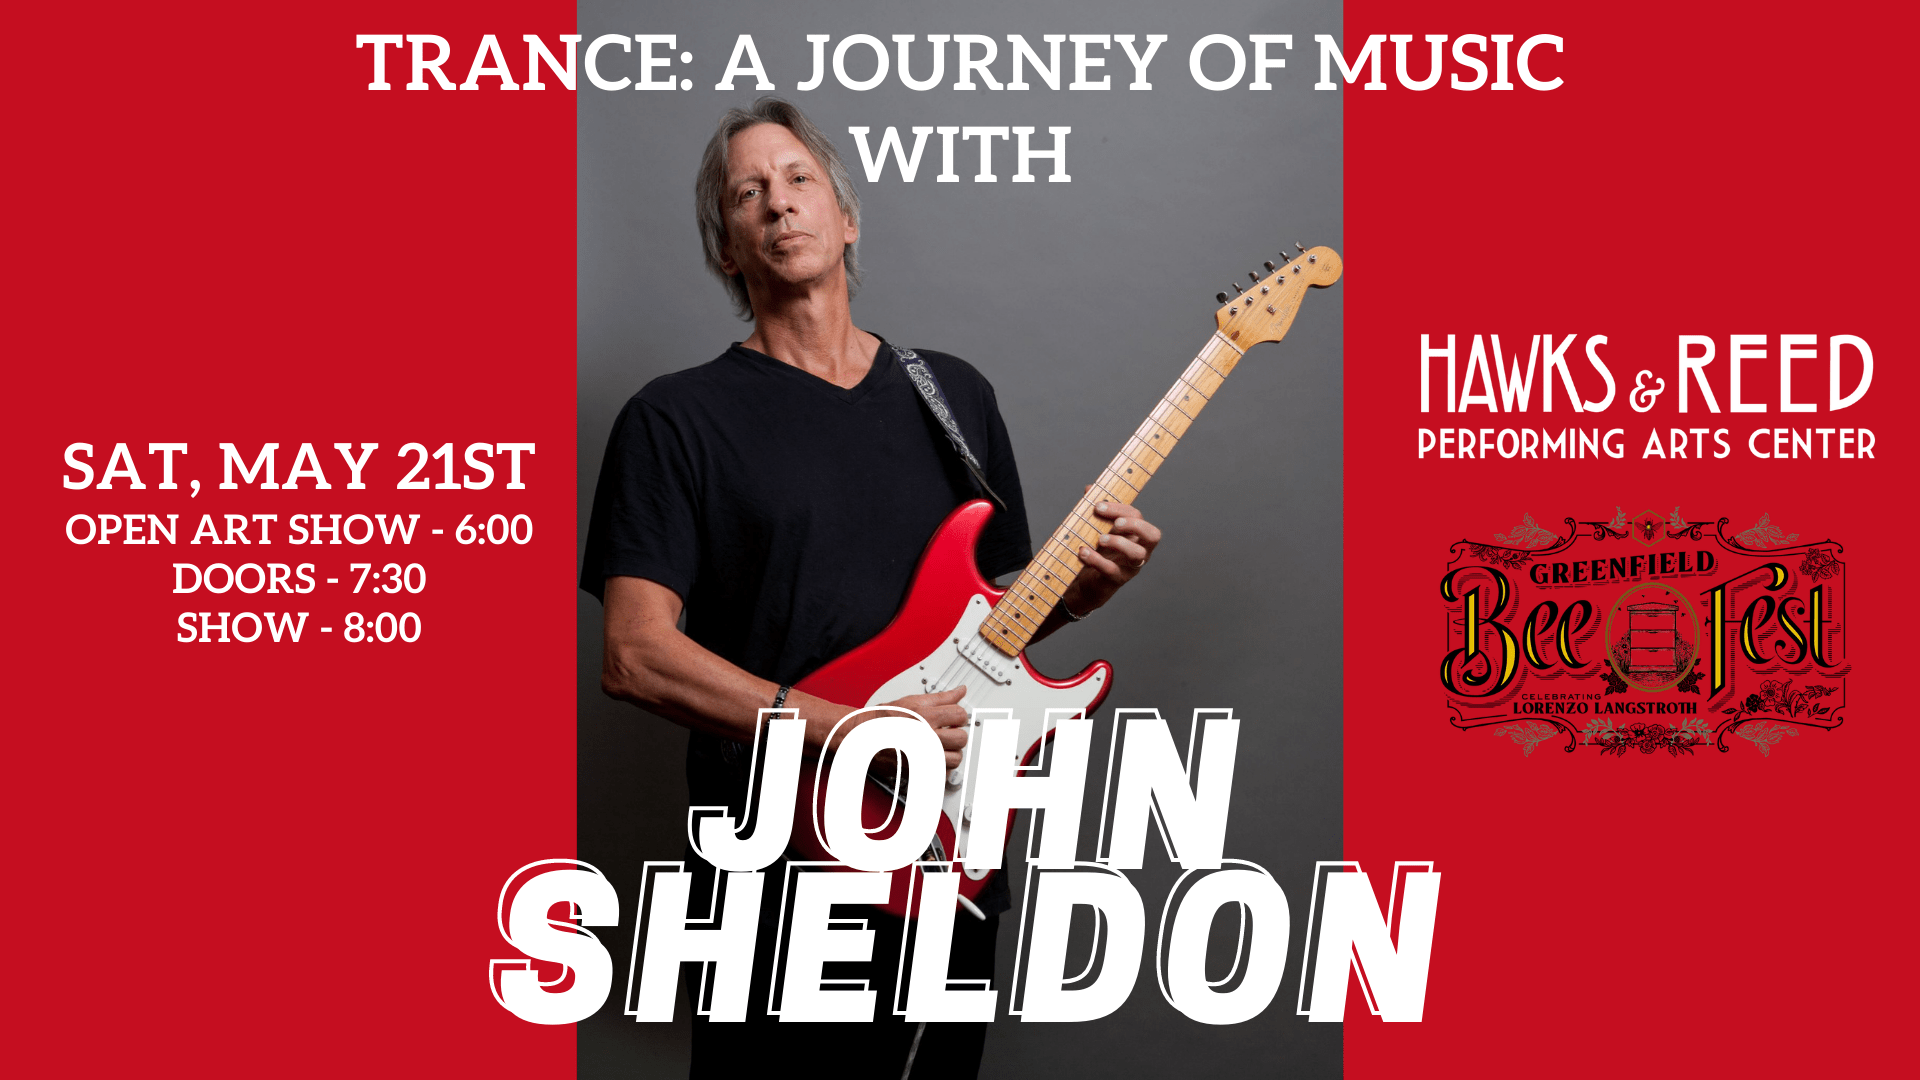 Trance – a Journey of Music with John Sheldon at Hawks and Reed